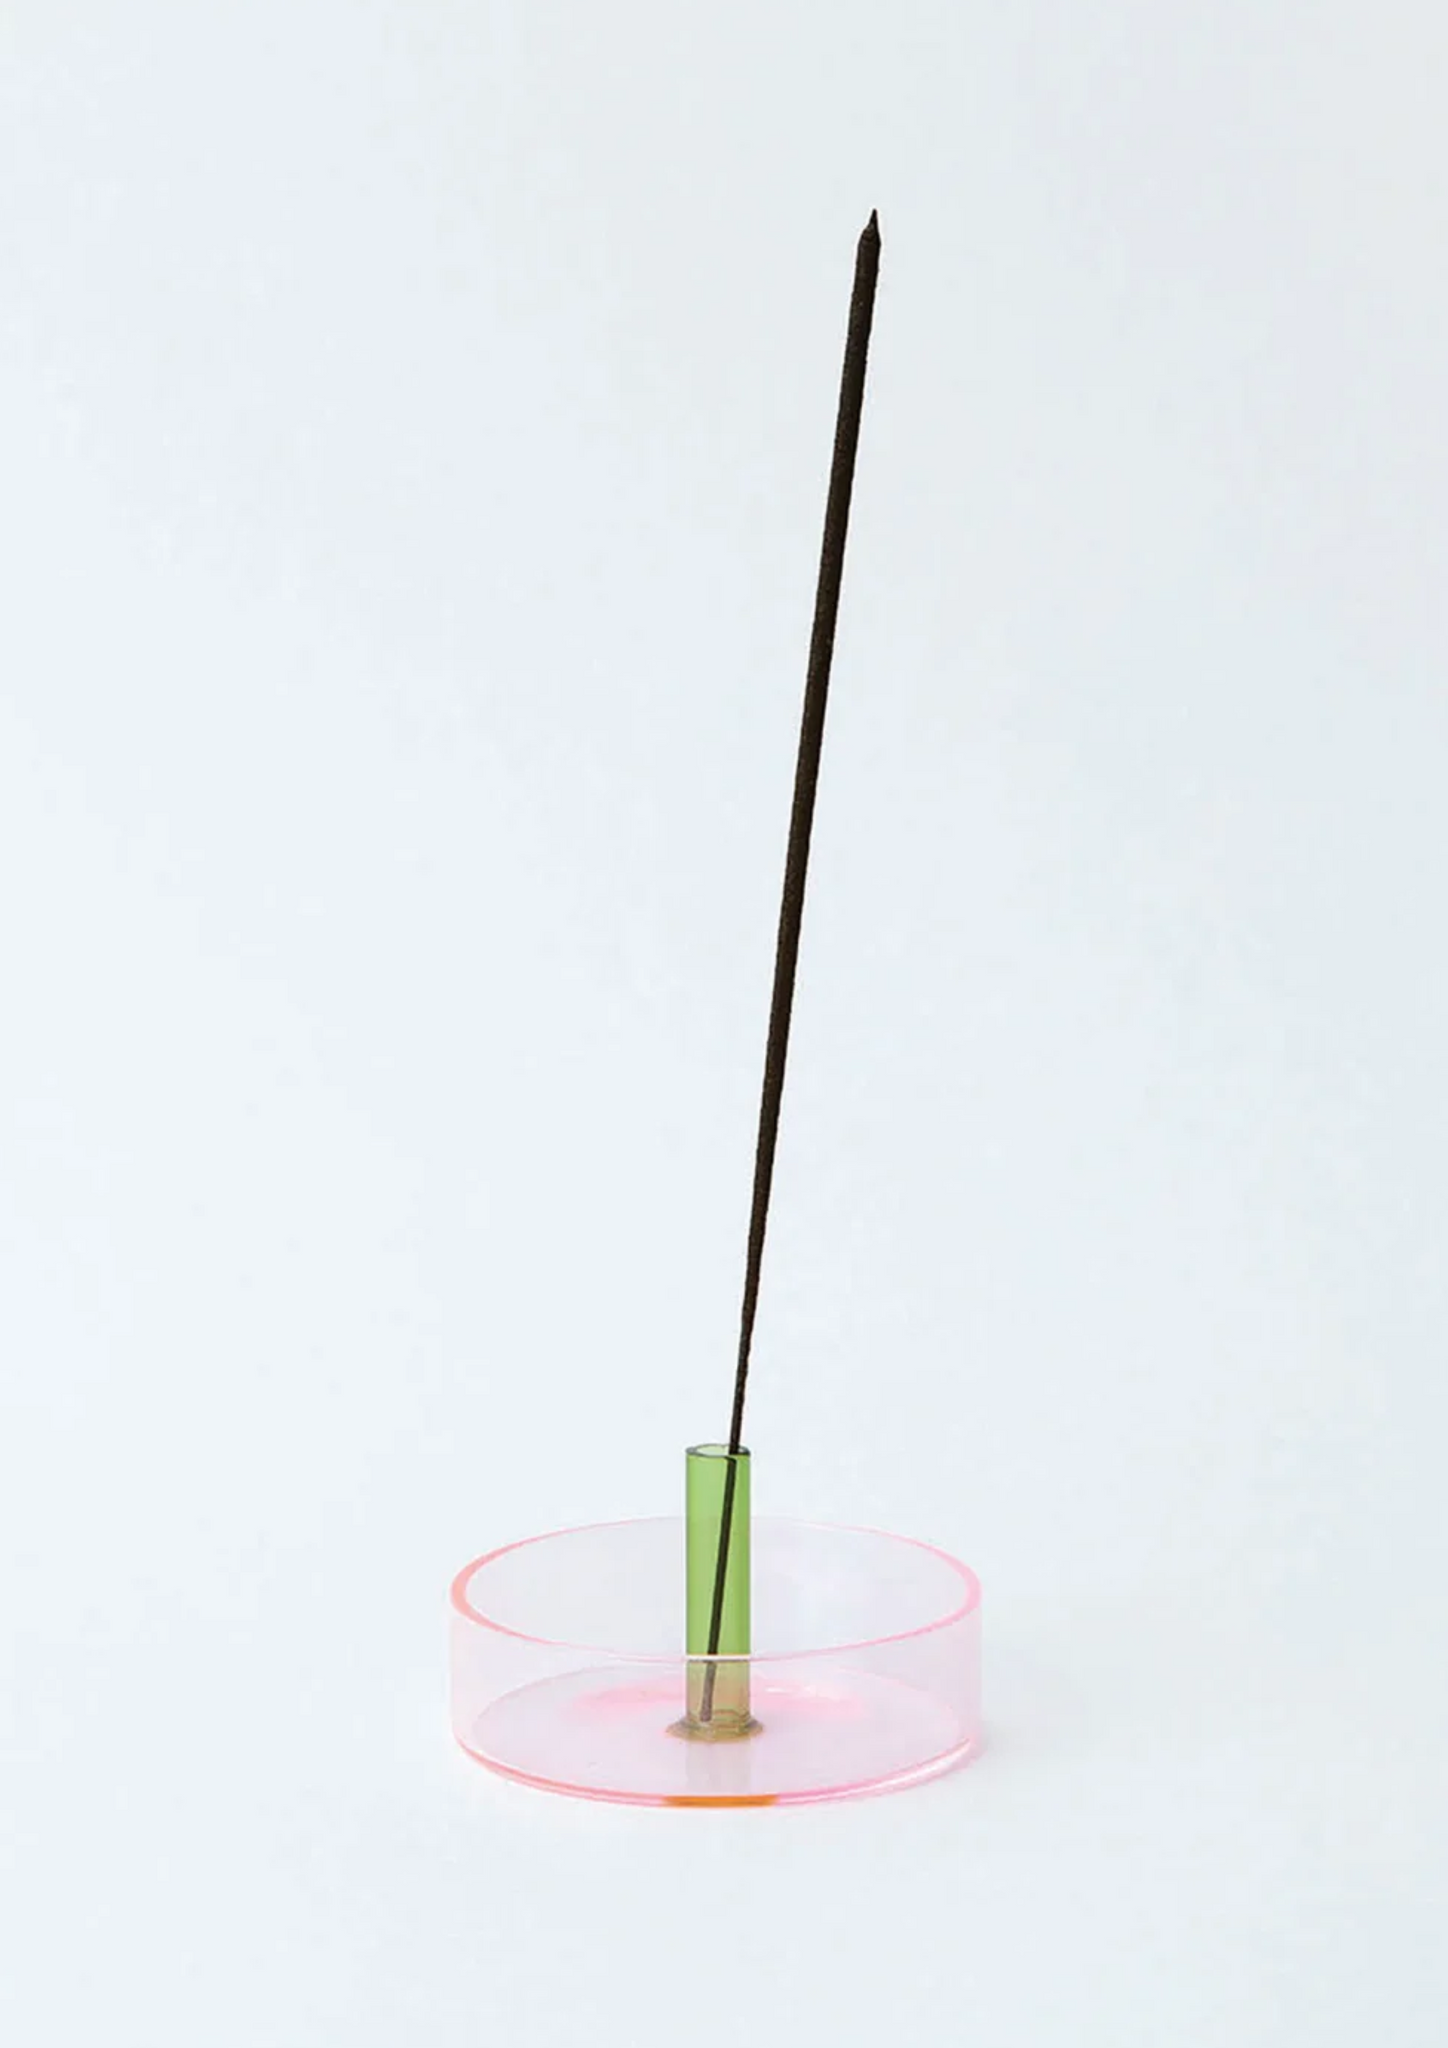 Duo Tone Glass Incense Holder - Pink/Green